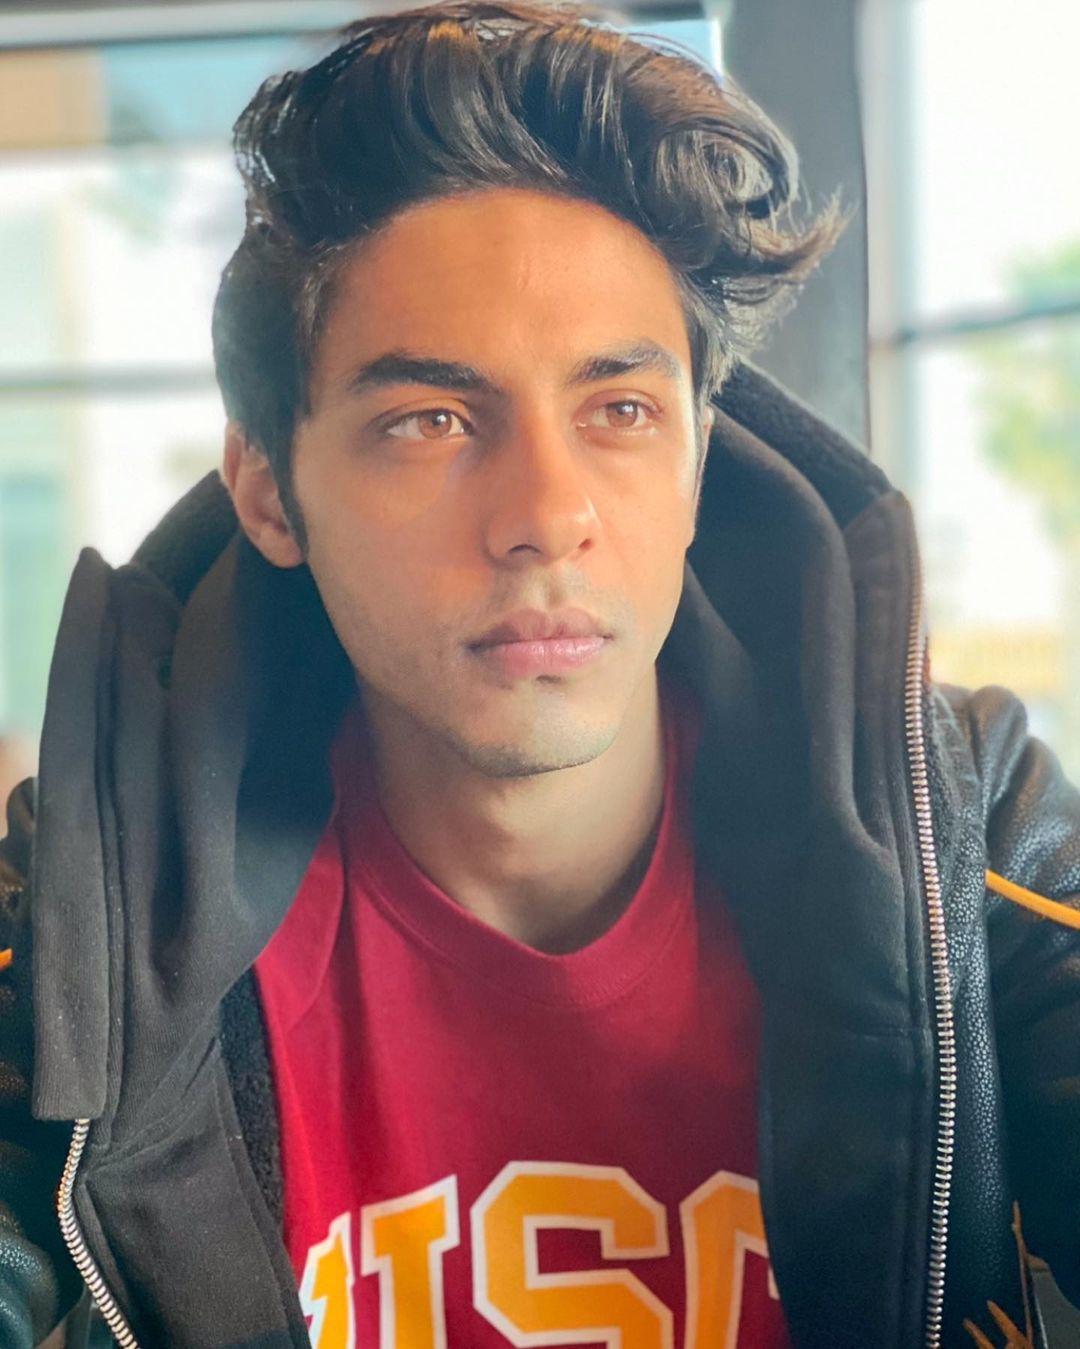 3rd GenerationAryan Khan is the firstborn of Shah Rukh Khan and Gauri Khan. Aryan bears an uncanny resemblance to Shah Rukh Khan. He went abroad to pursue his education, and since his return, he has started his own clothing brand, Dyavol. Furthermore, he's also gearing up for his directorial debut.